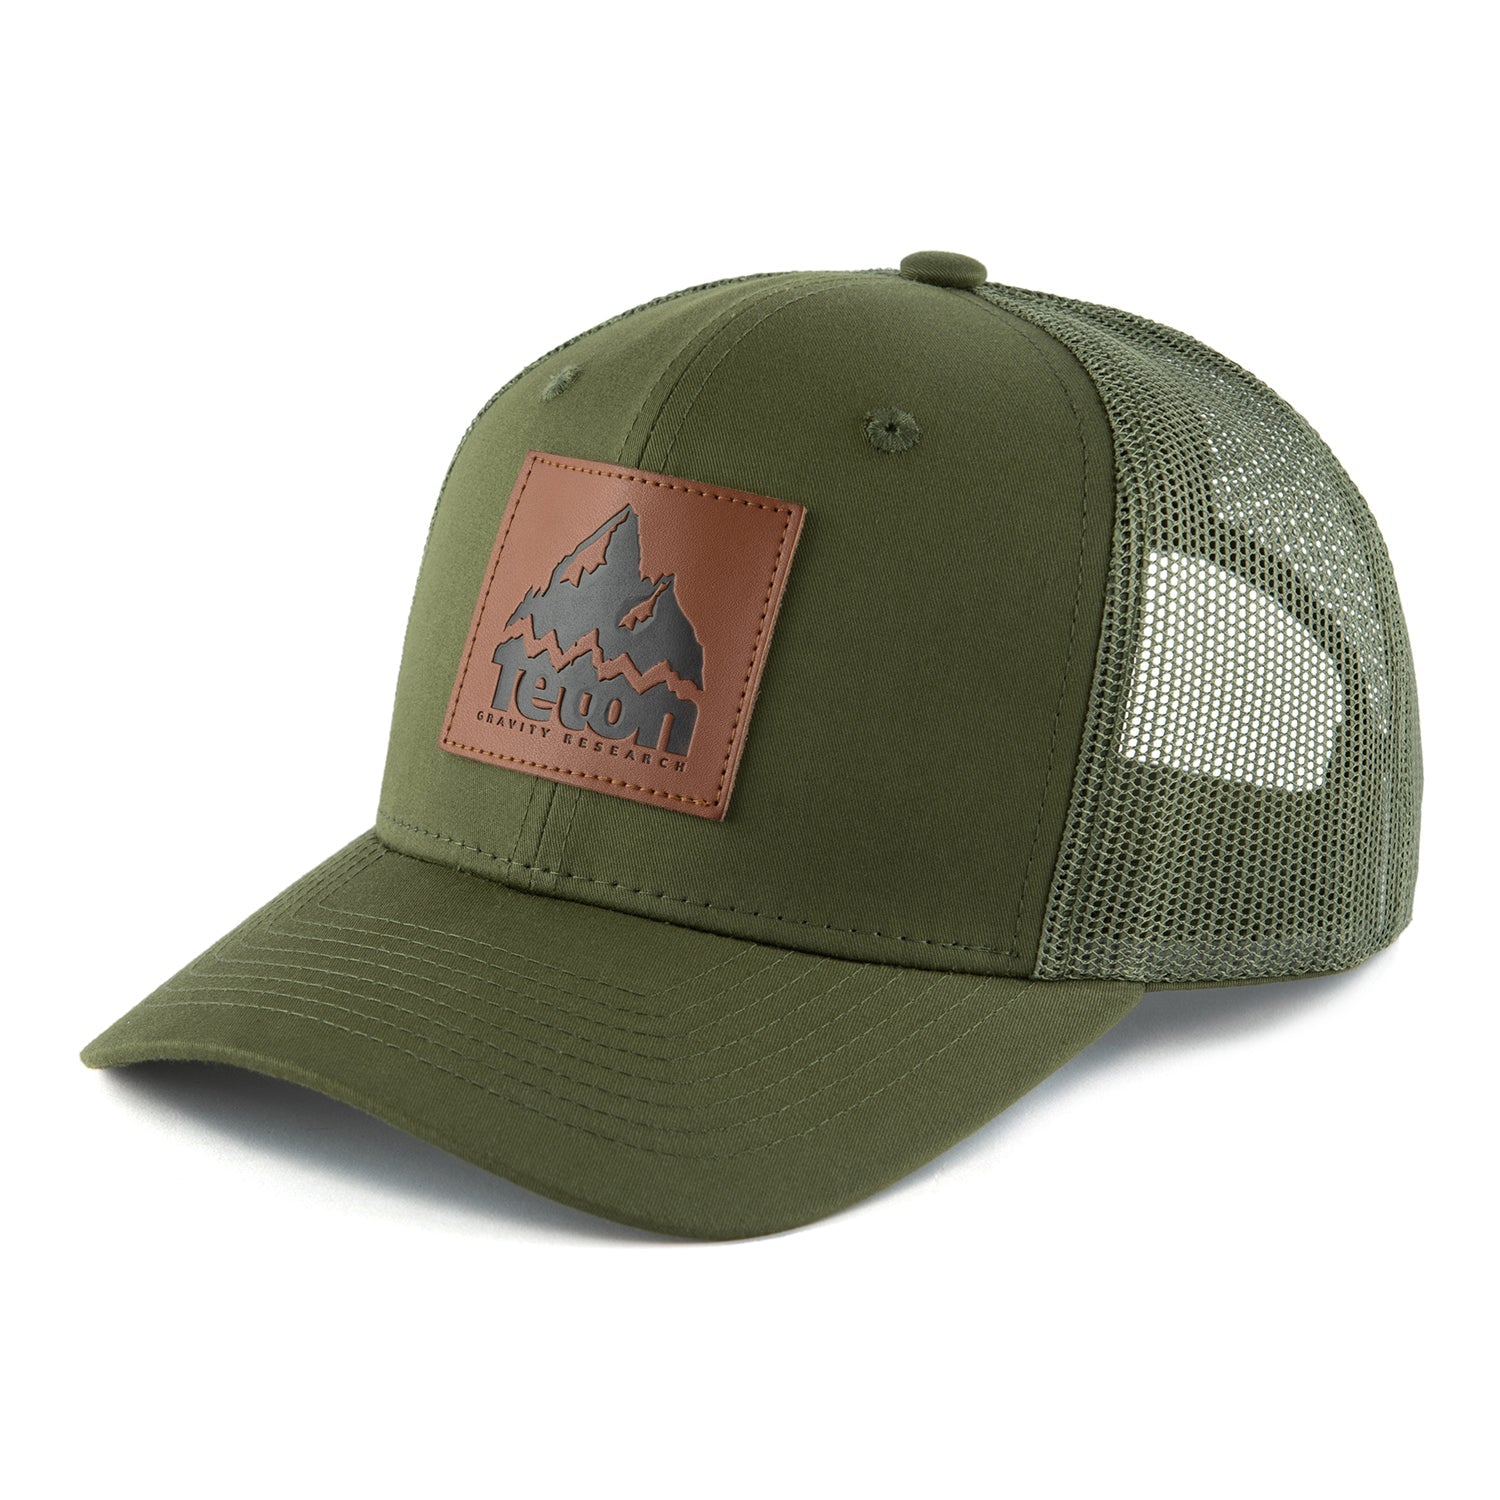 Expedition Trucker Hat - Teton Gravity Research